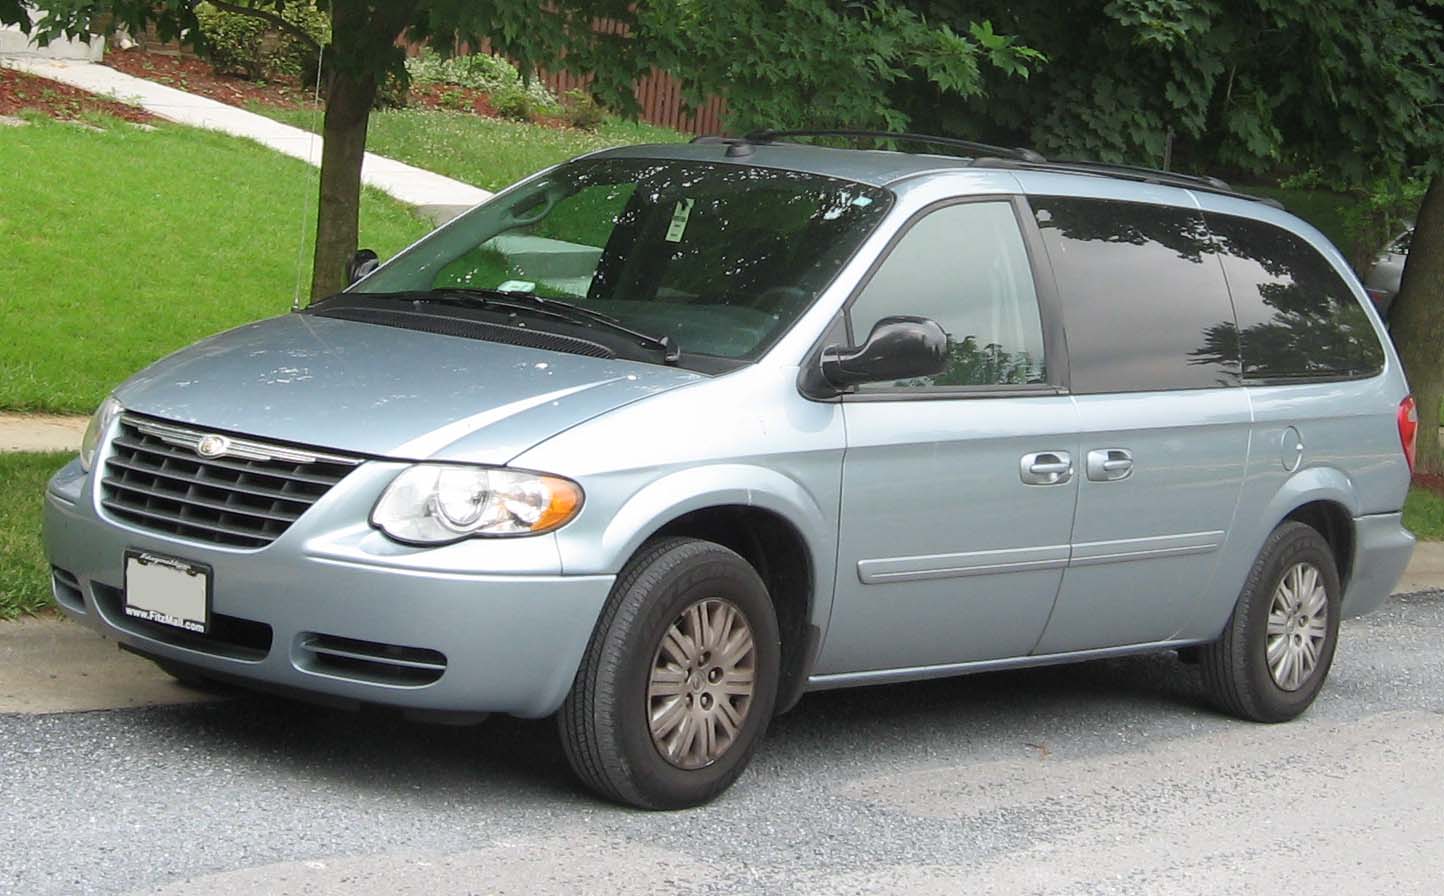 2005 Chrysler Town and Country Information and photos